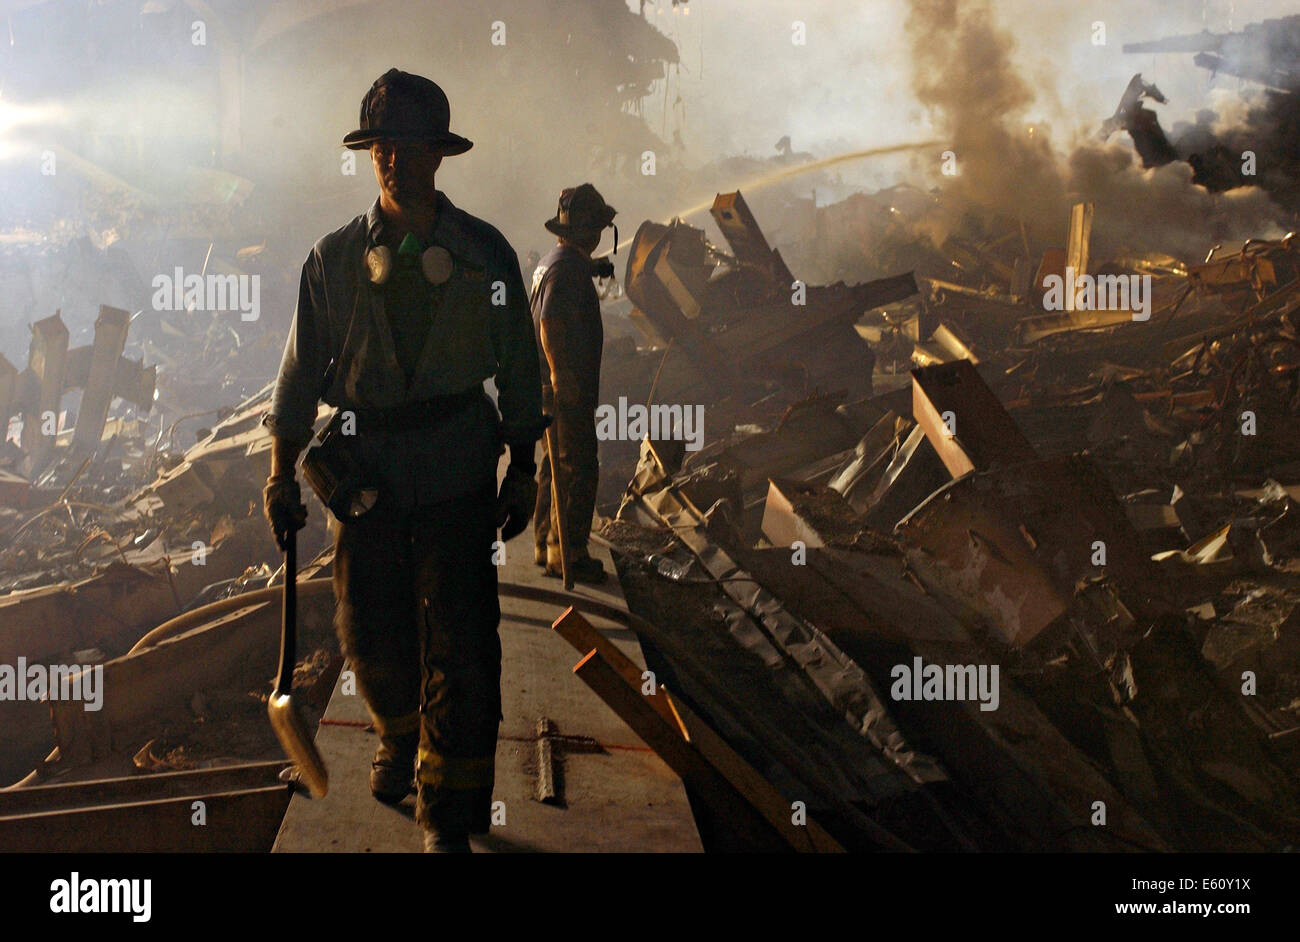 Firemen continue to battle fires as work continue amongst the wreckage of the World Trade Center in the aftermath of a massive terrorist attack which destroyed the twin towers killing 2,606 people September 19, 2001 in New York, NY. Stock Photo